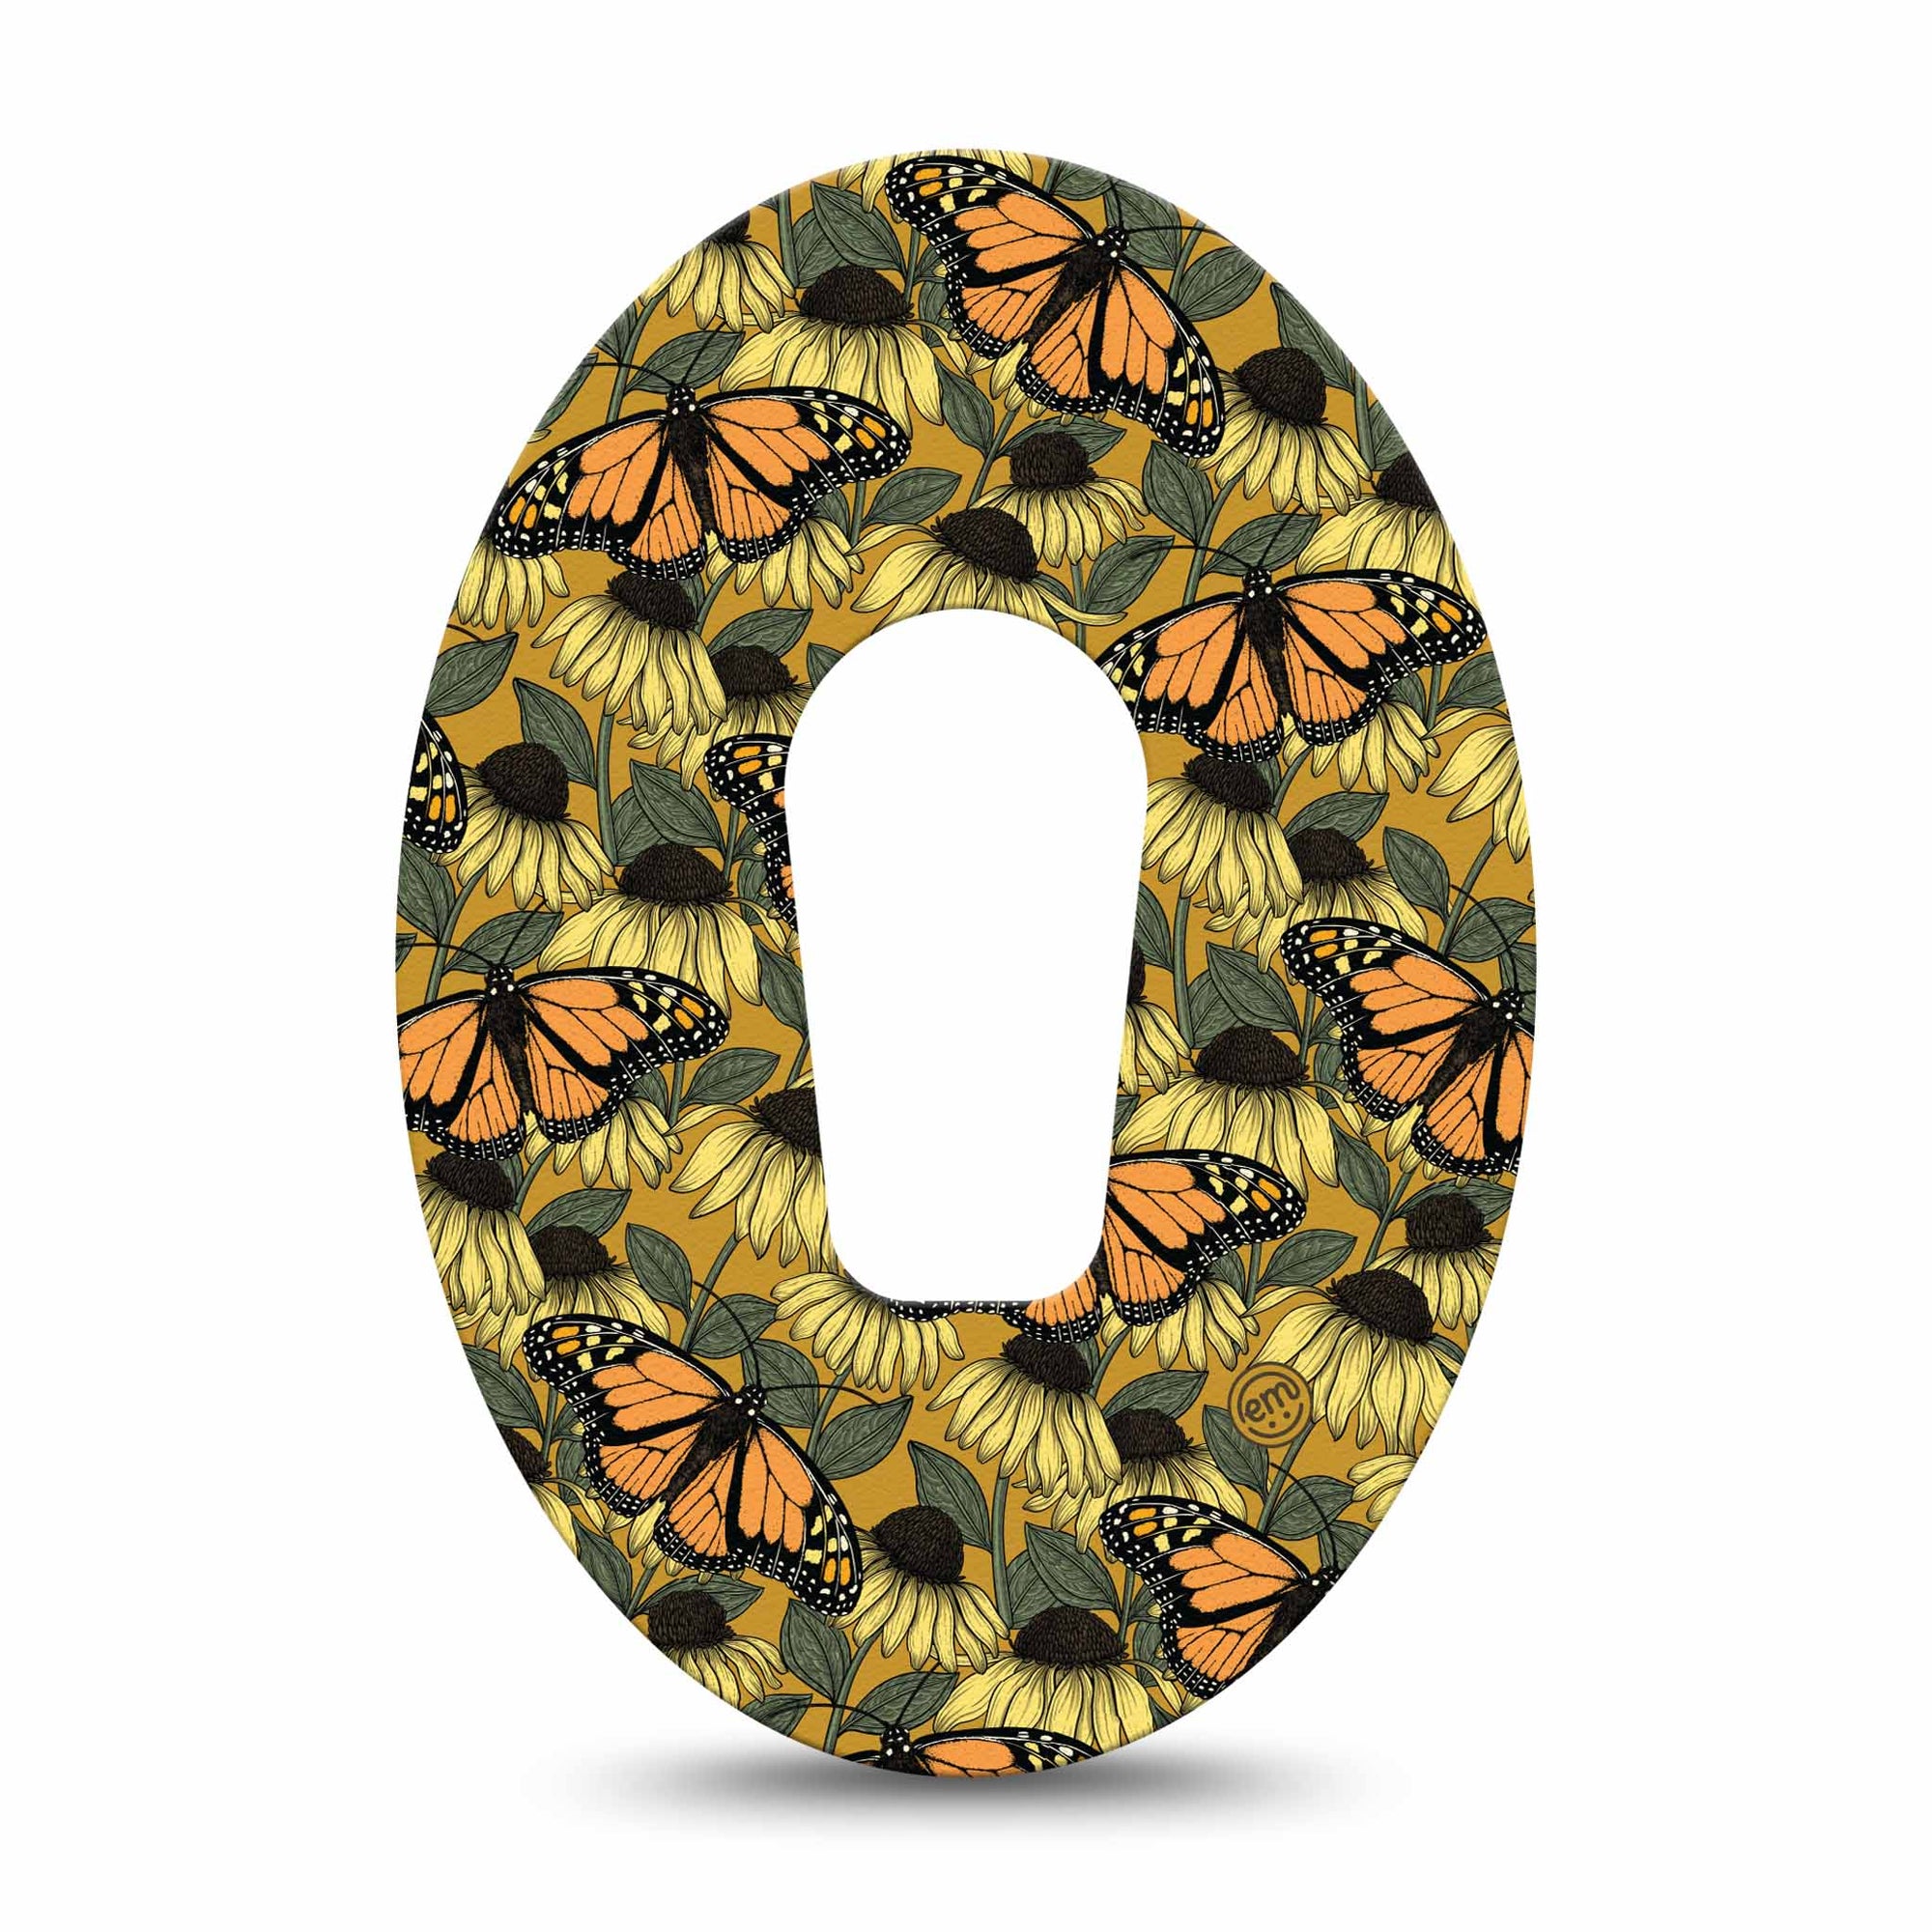 ExpressionMed Coneflowers & Monarchs Dexcom G6 Tape Orange butterflies over mustard colored florals, CGM Patch Design